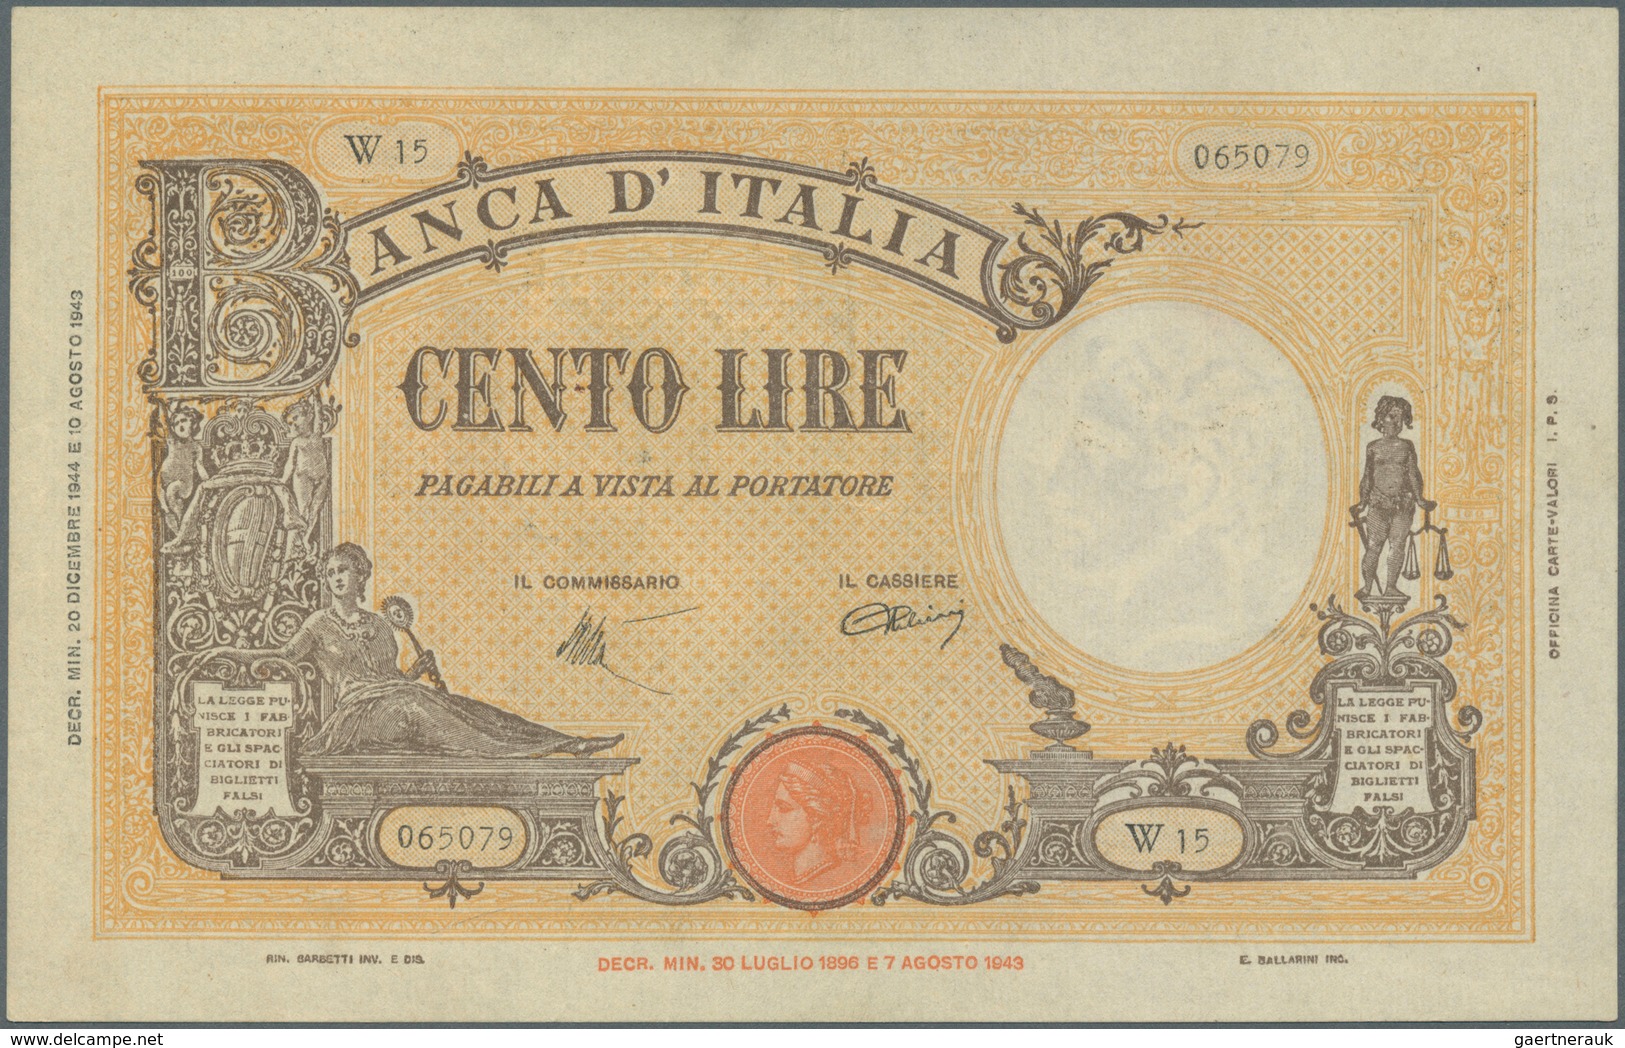 Italy / Italien: set of 5 notes 100 Lire 1943/44 P. 67, all in similar condition, light folds in pap